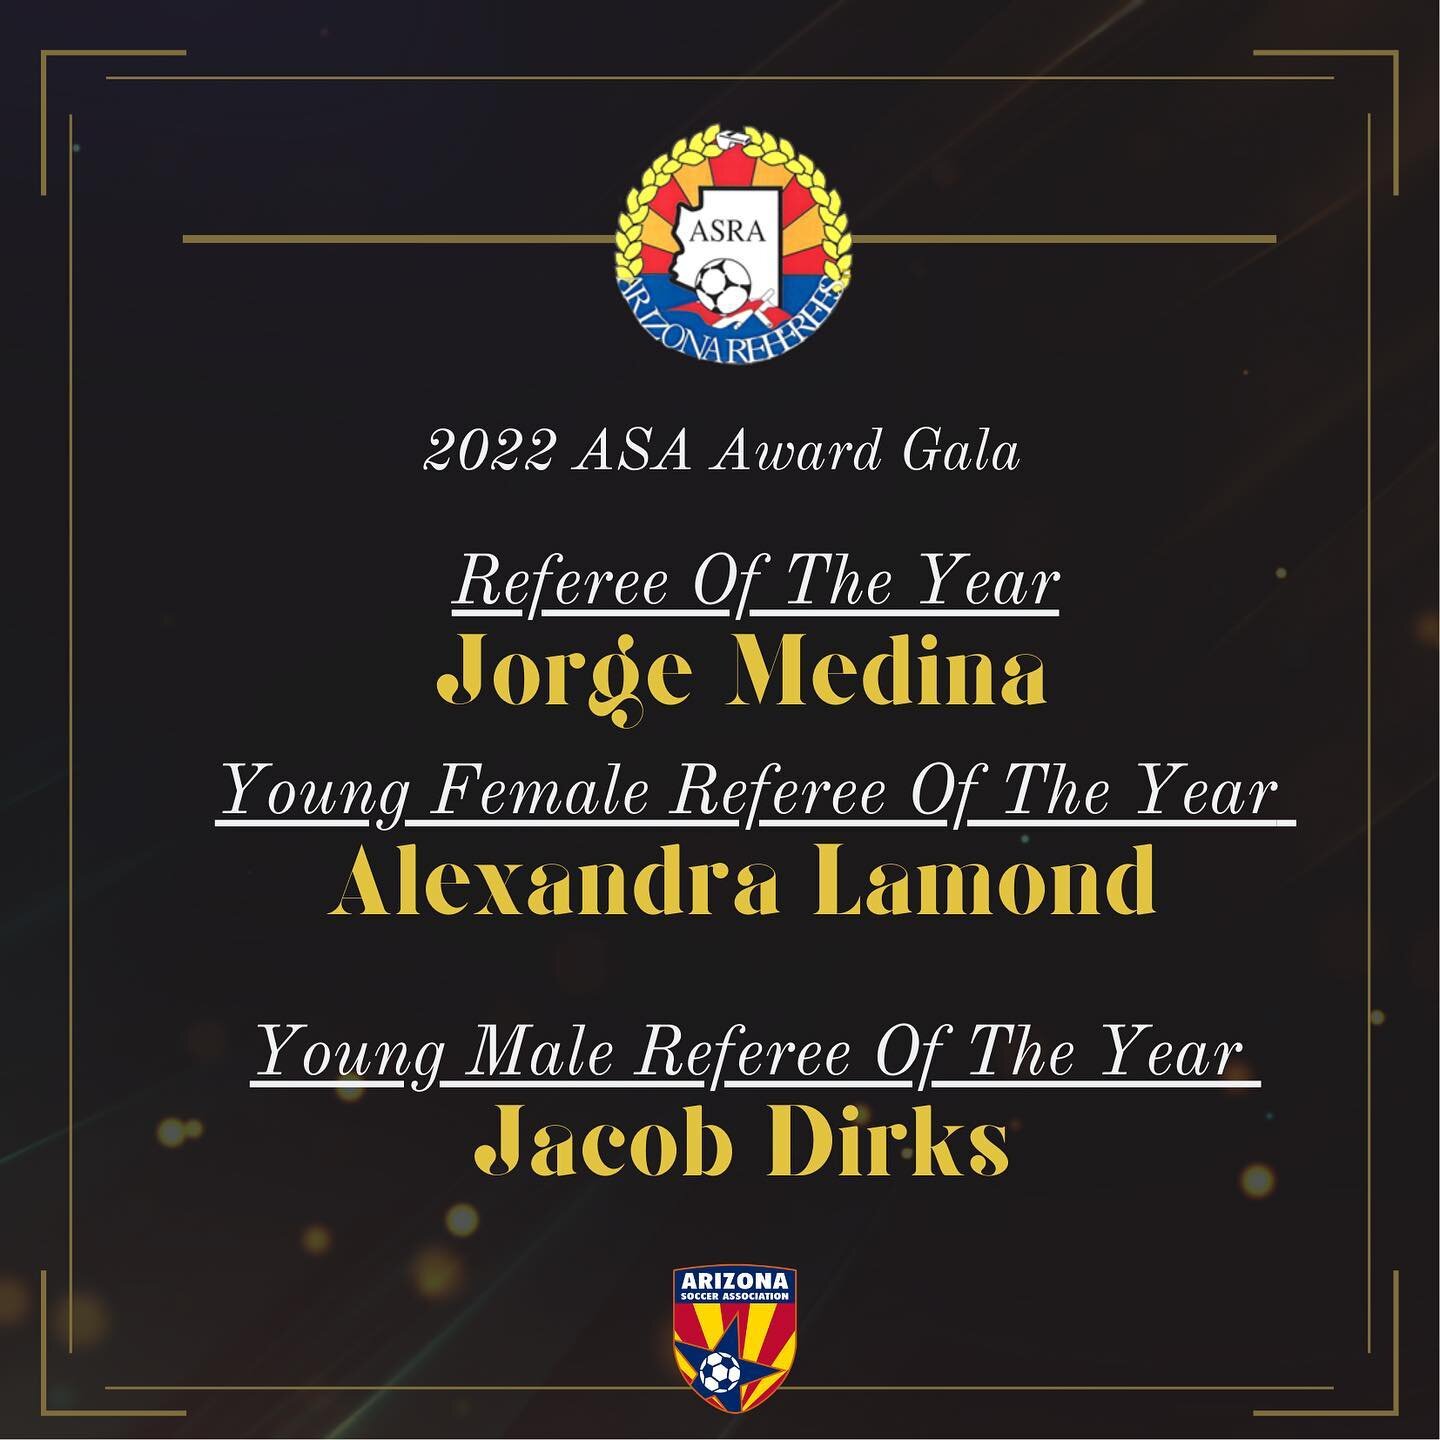 Please join us in congratulating these three referees! 👏
Jorge Medina- Referee Of The Year 
Alexandra Lamond- Female Referee Of the Year
Jacob Dirks-Male Referee Of The Year 
Congratulations all keep up the great work both on and off the field! 
Rea